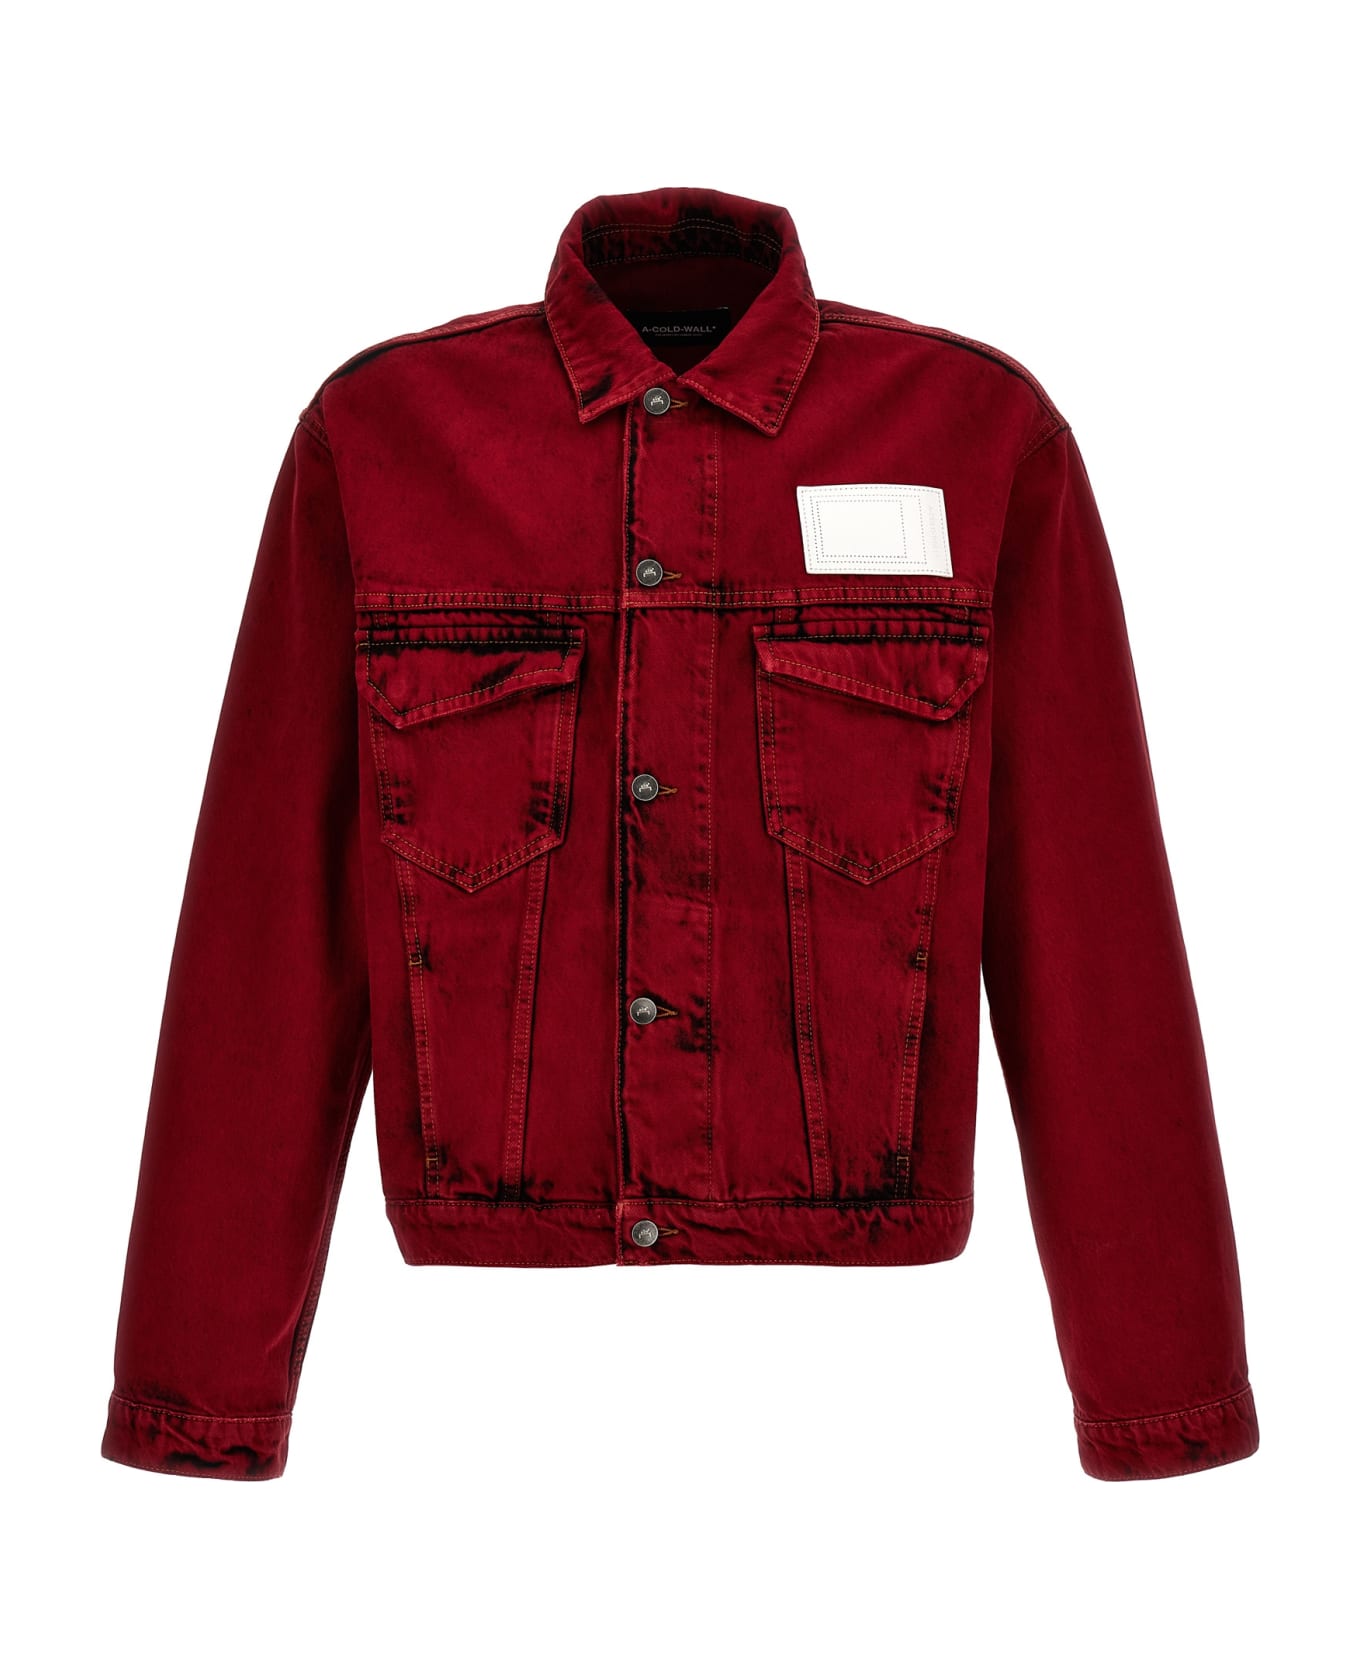 A-COLD-WALL 'strand Trucker' Jacket - Red